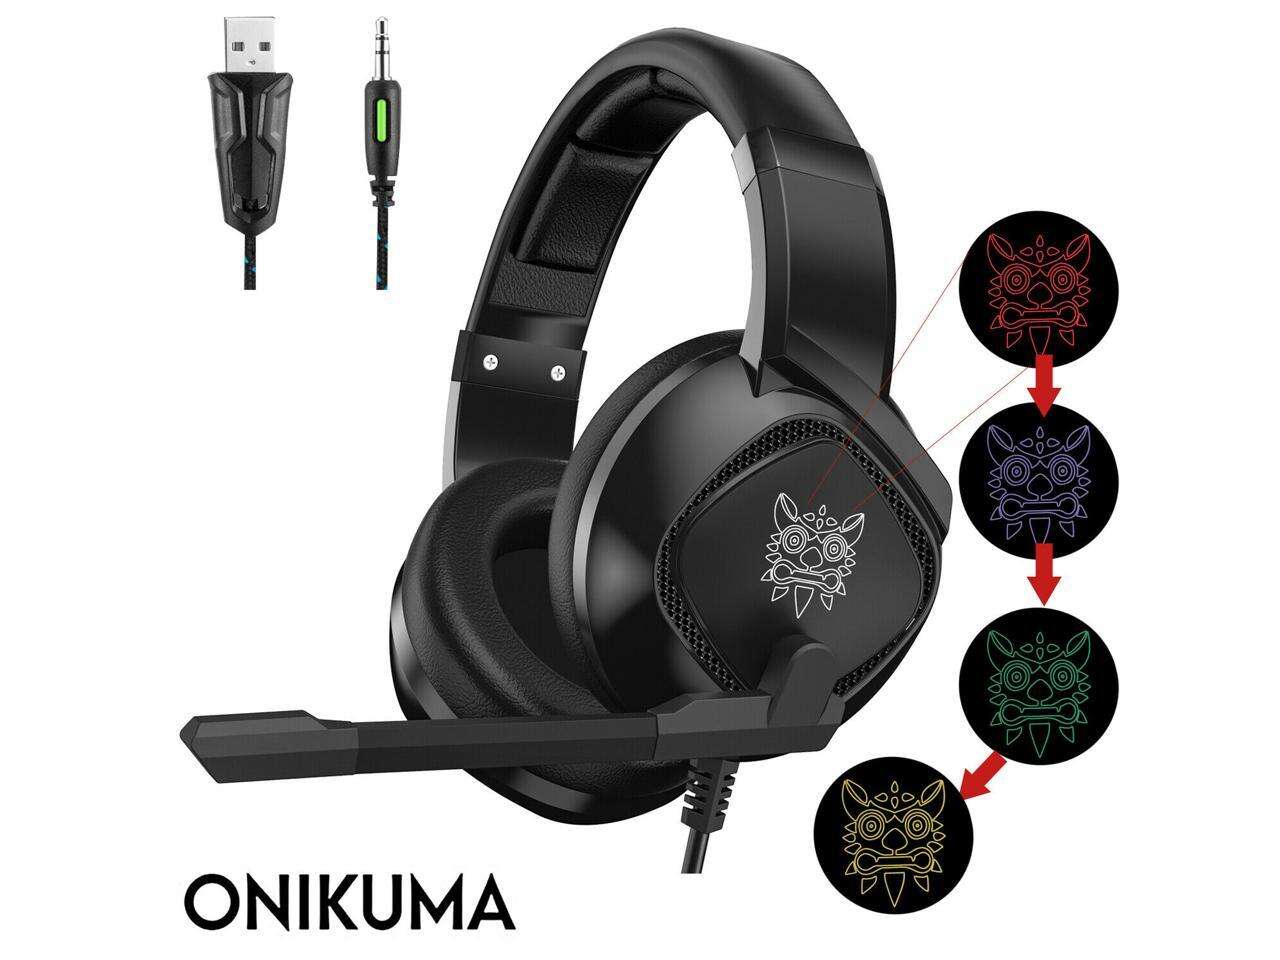 ONIKUMA K19 3.5mm Jack Stereo Gaming Headset Headphone for PS4 NewXbox One PC Tablet Laptop with Mic LED Light